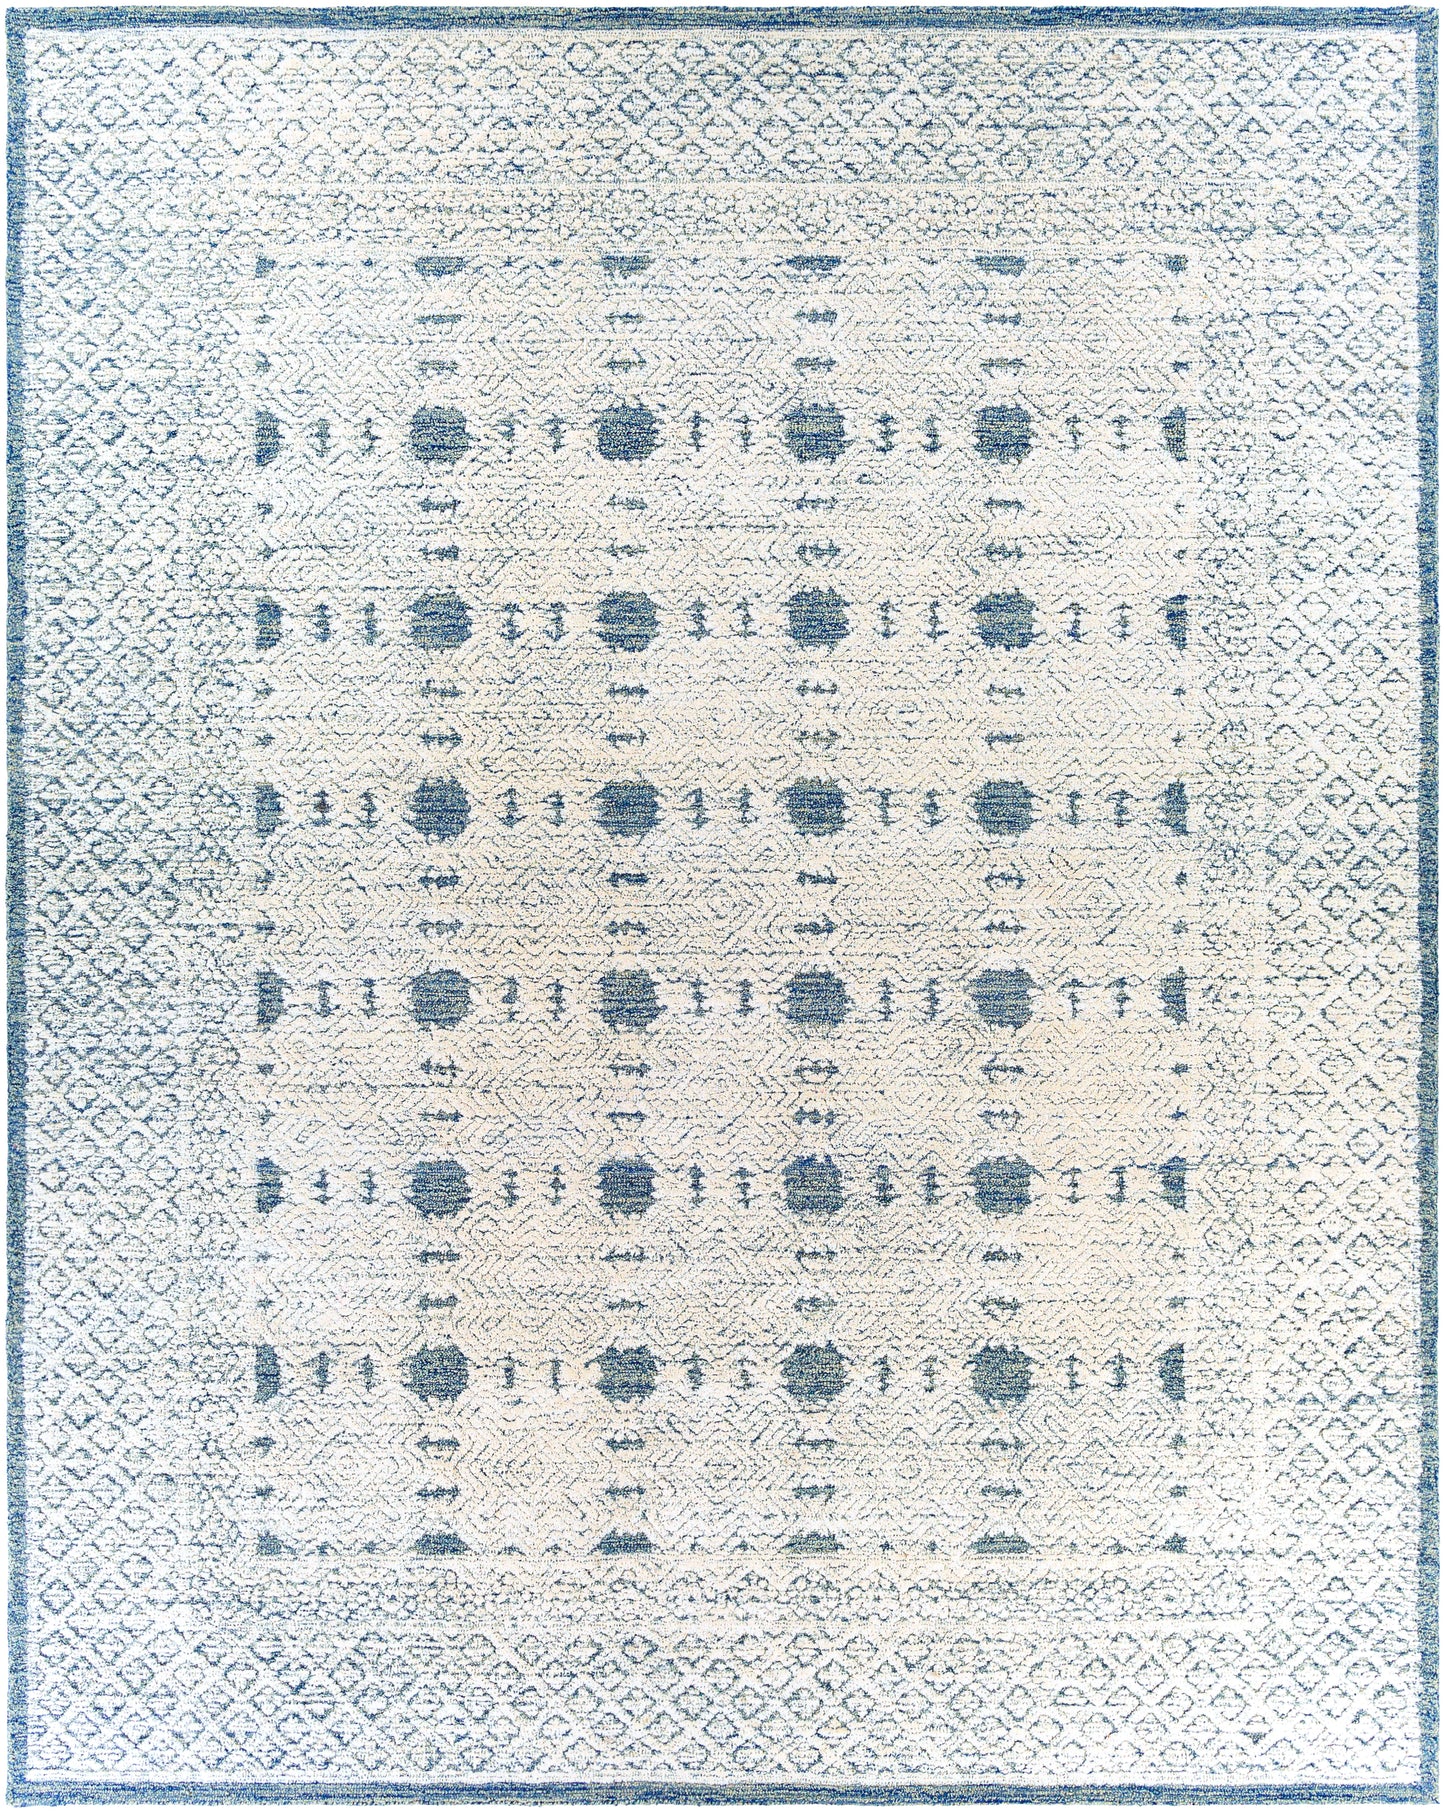 Louvre 23813 Hand Tufted Wool Indoor Area Rug by Surya Rugs